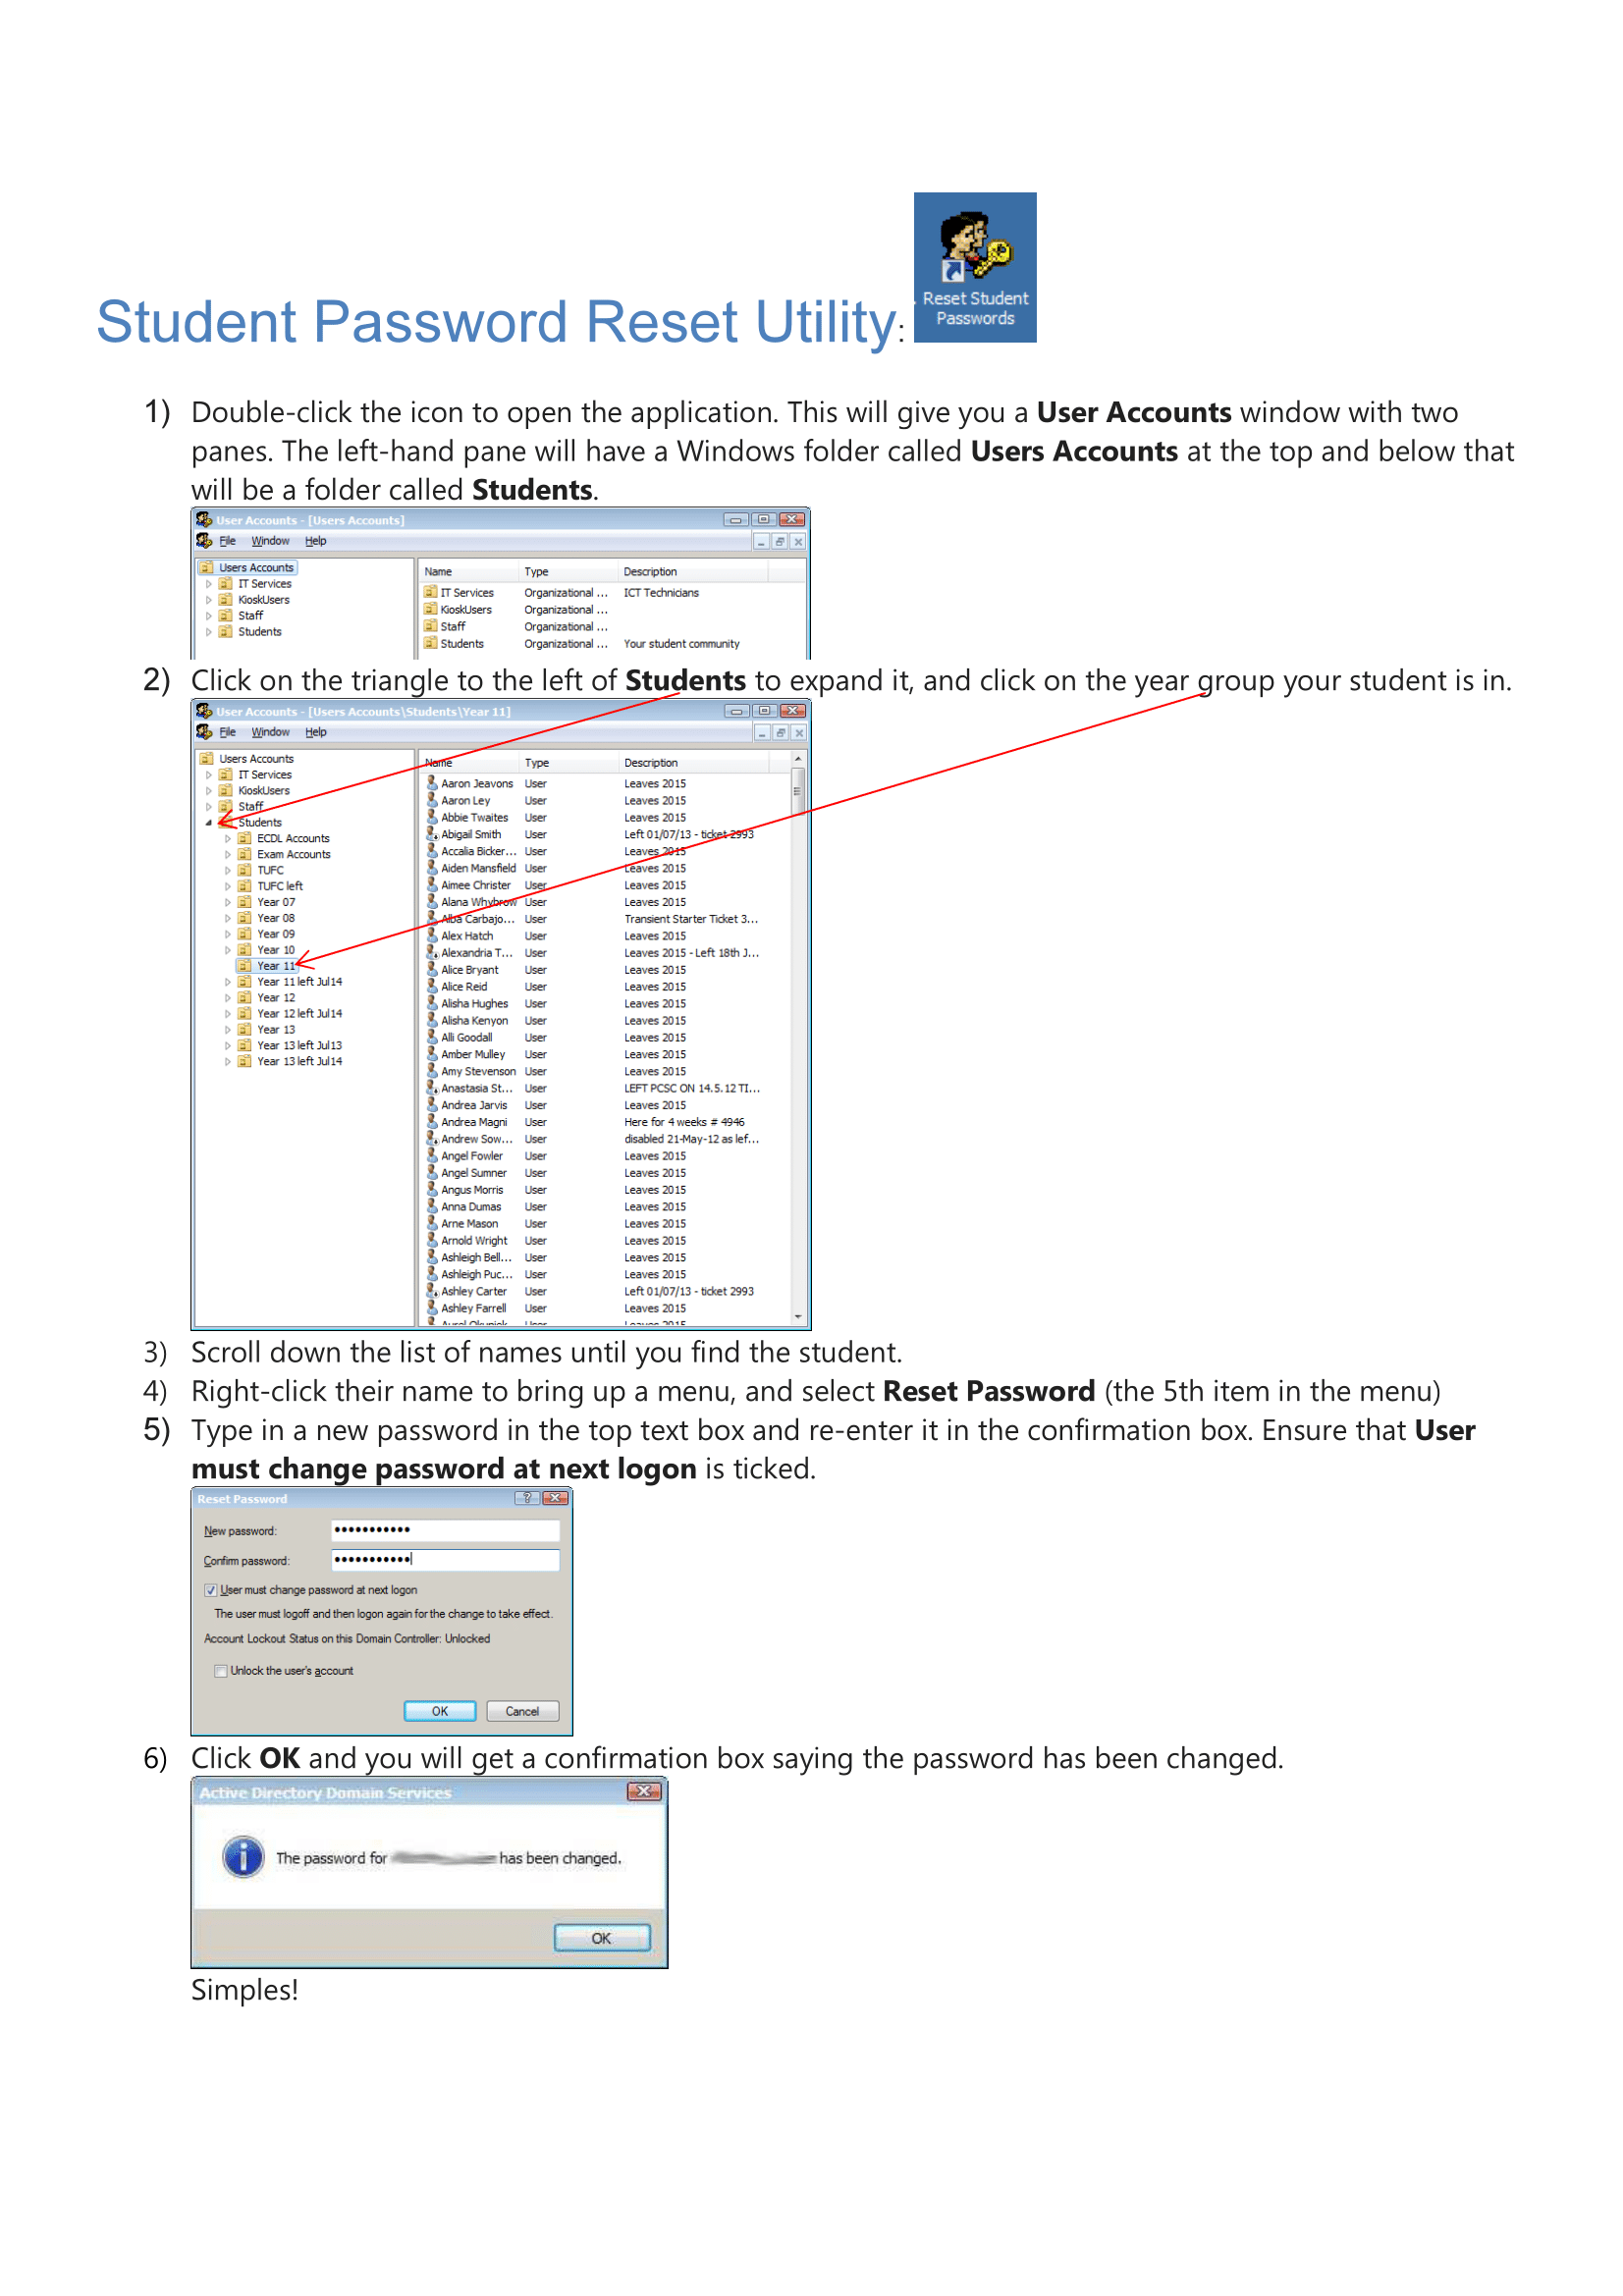 Student Password Reset Utility-1.png